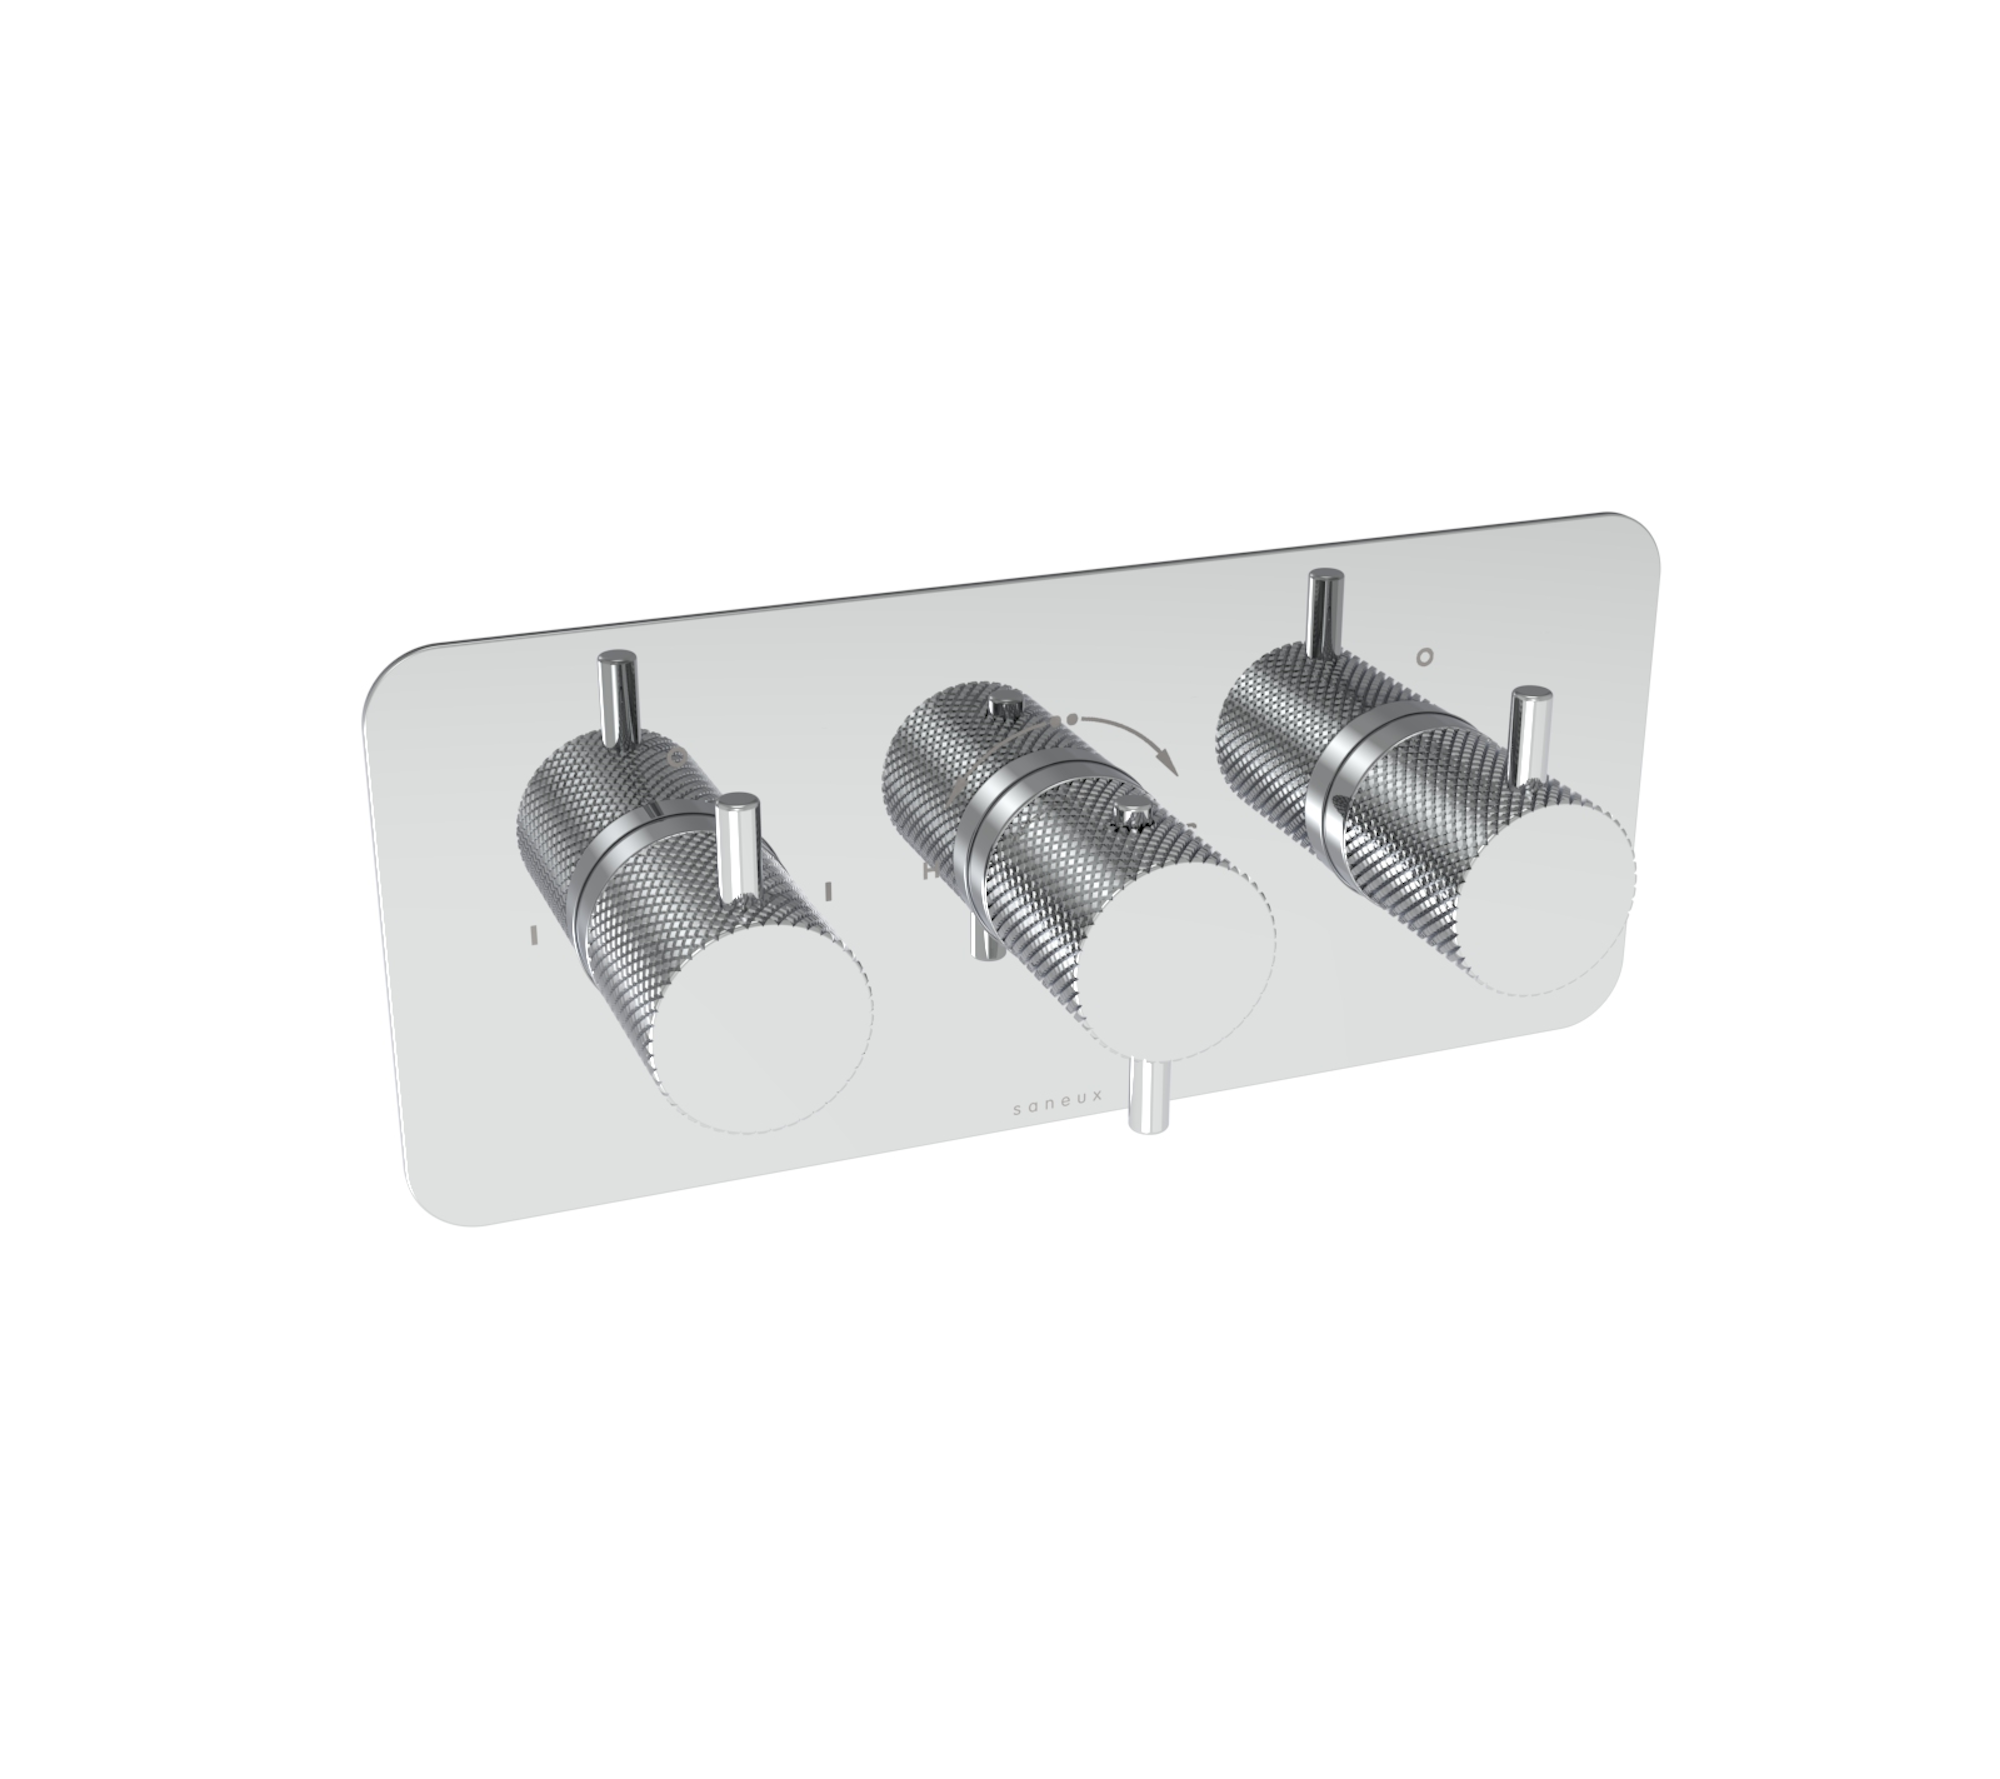 COS 3 way thermostatic shower valve kit in landscape with knurled handles - Chrome